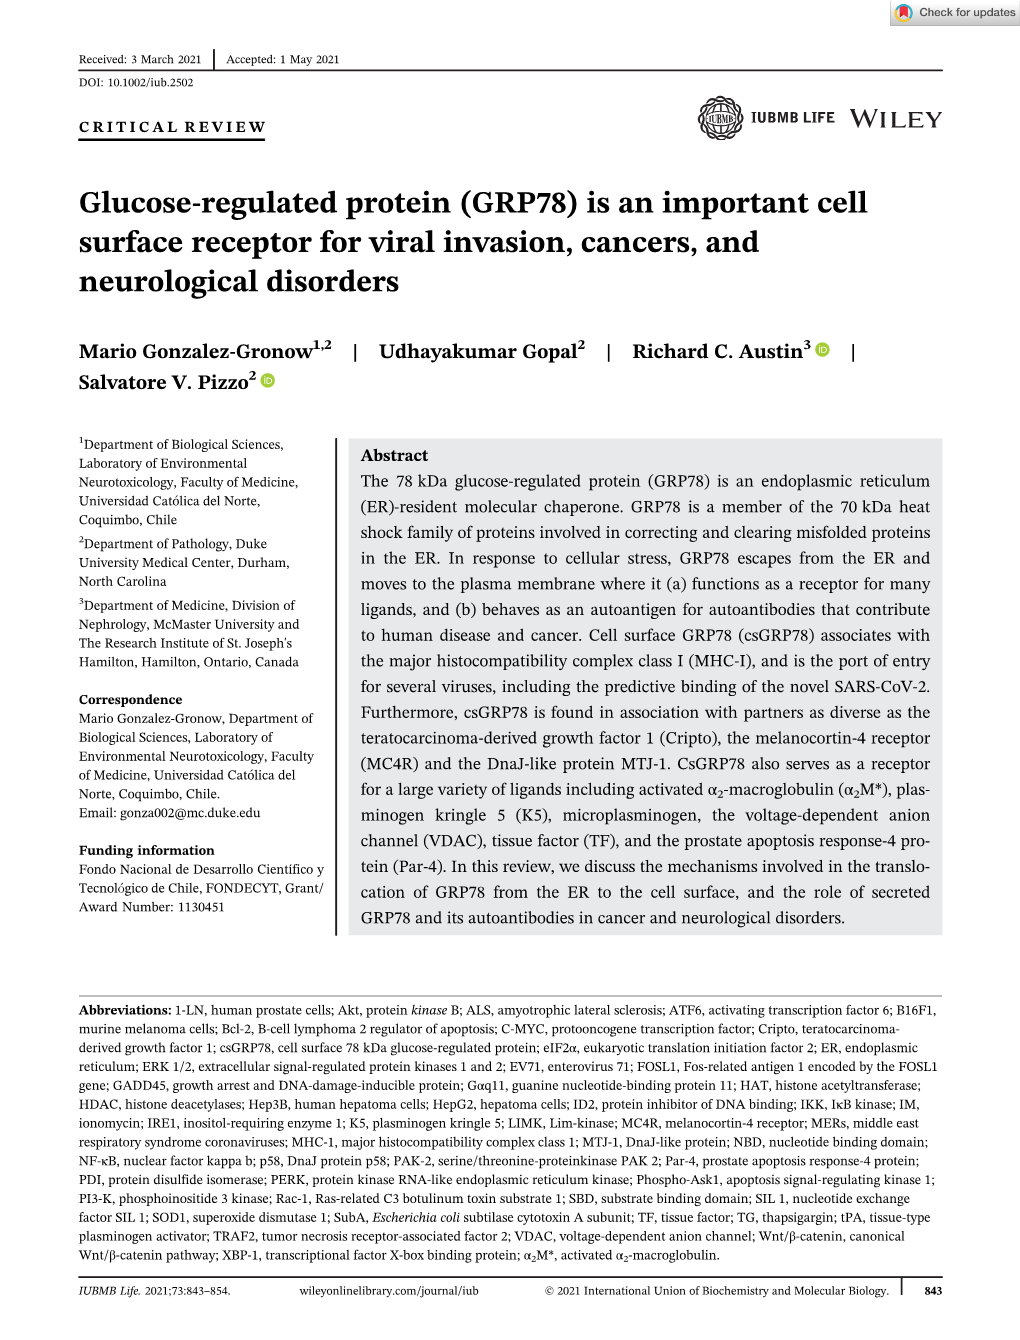 Glucose‐Regulated Protein (GRP78) Is an Important Cell Surface Receptor